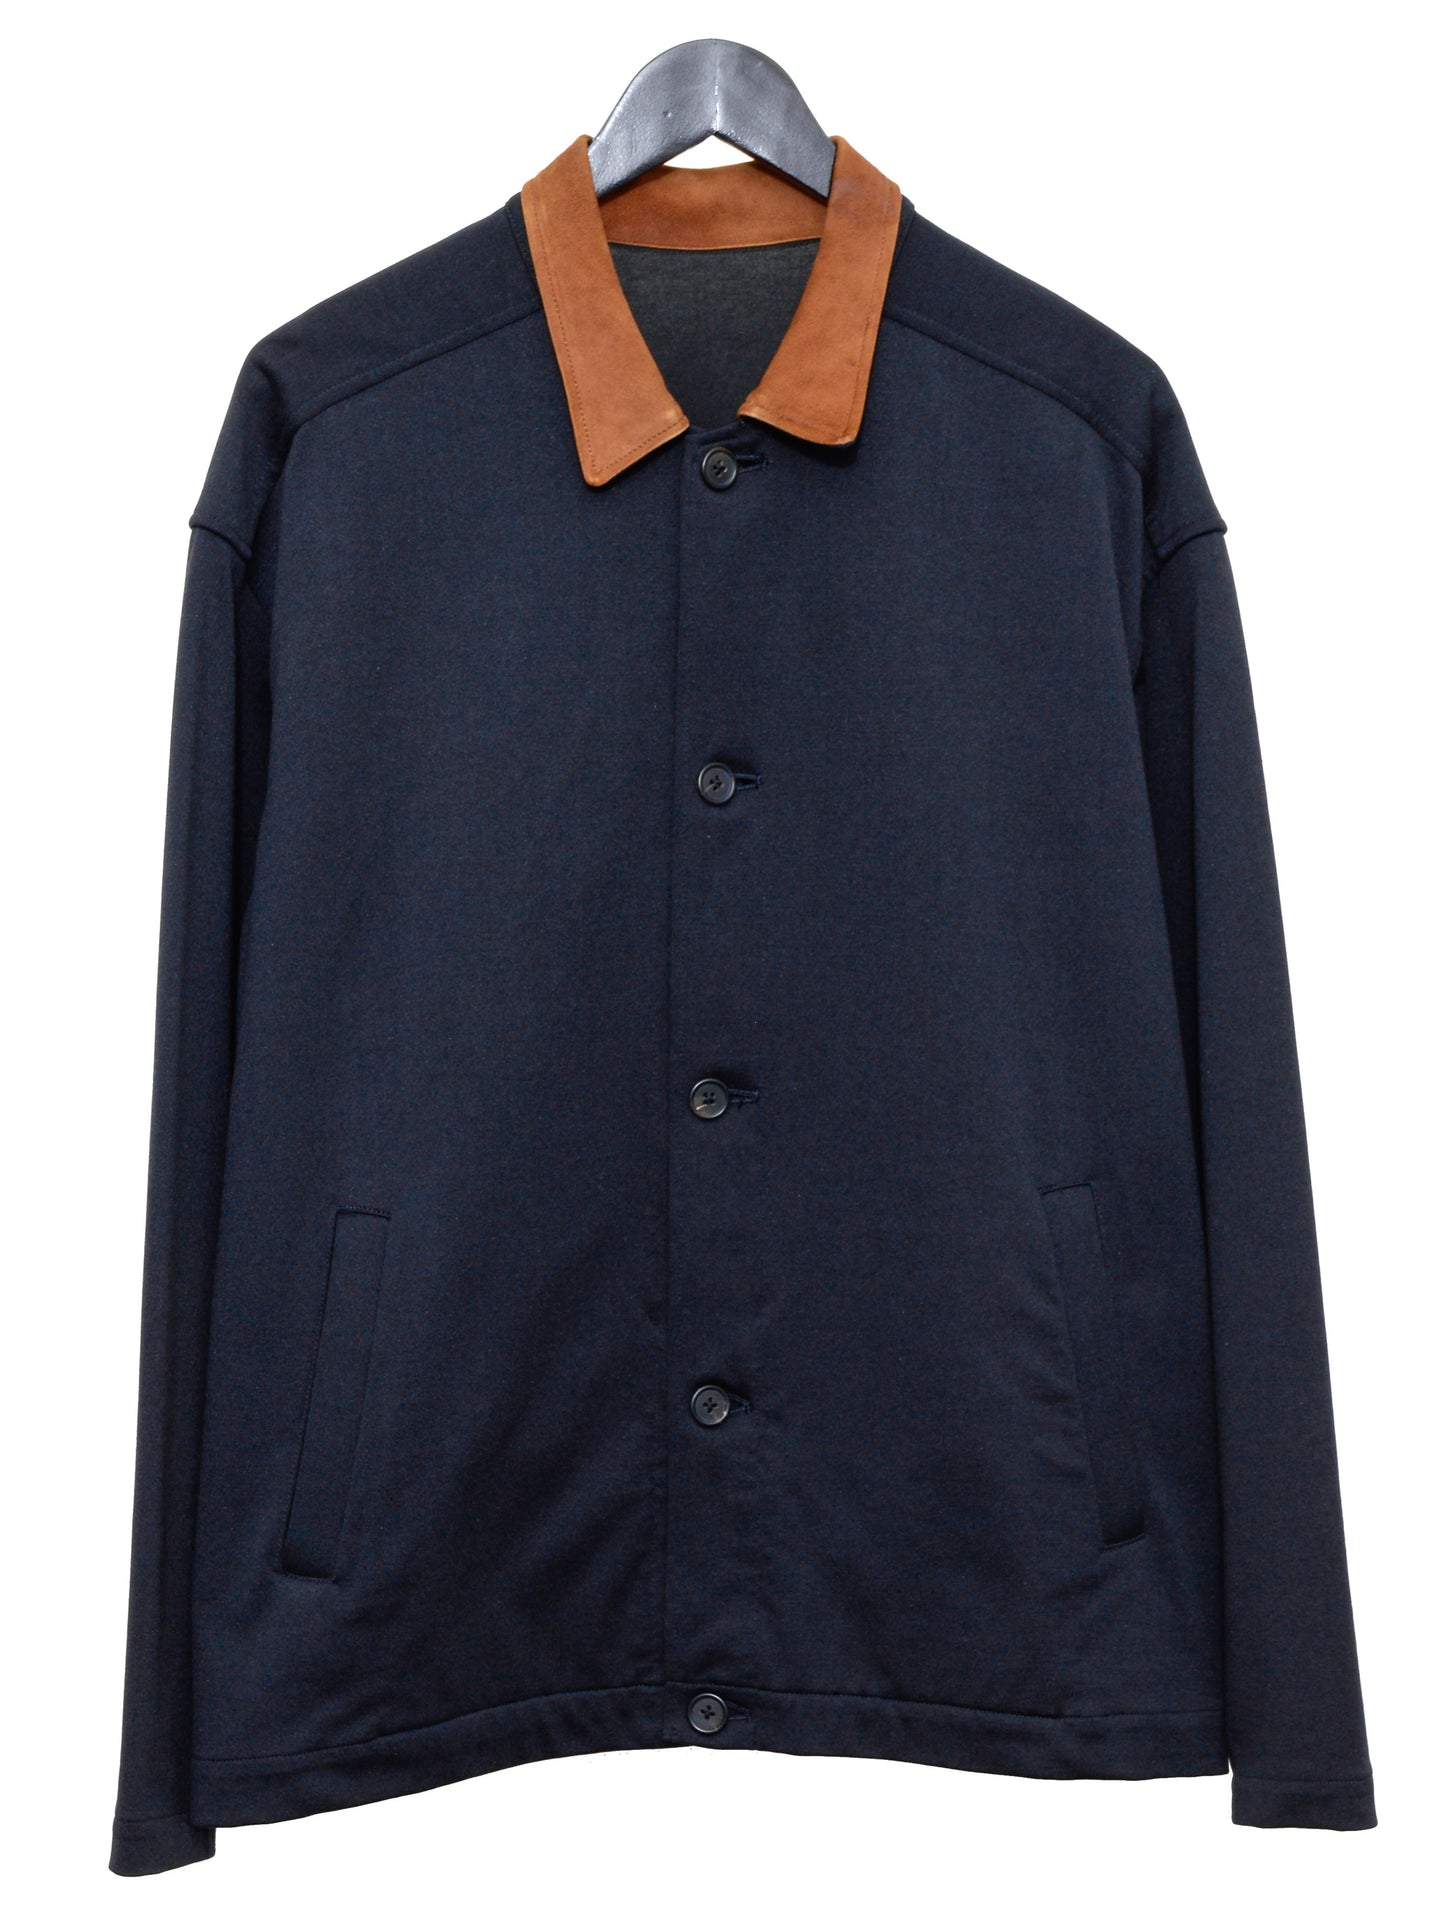 suede collar blouson navy ∙ cotton poly ∙ one size